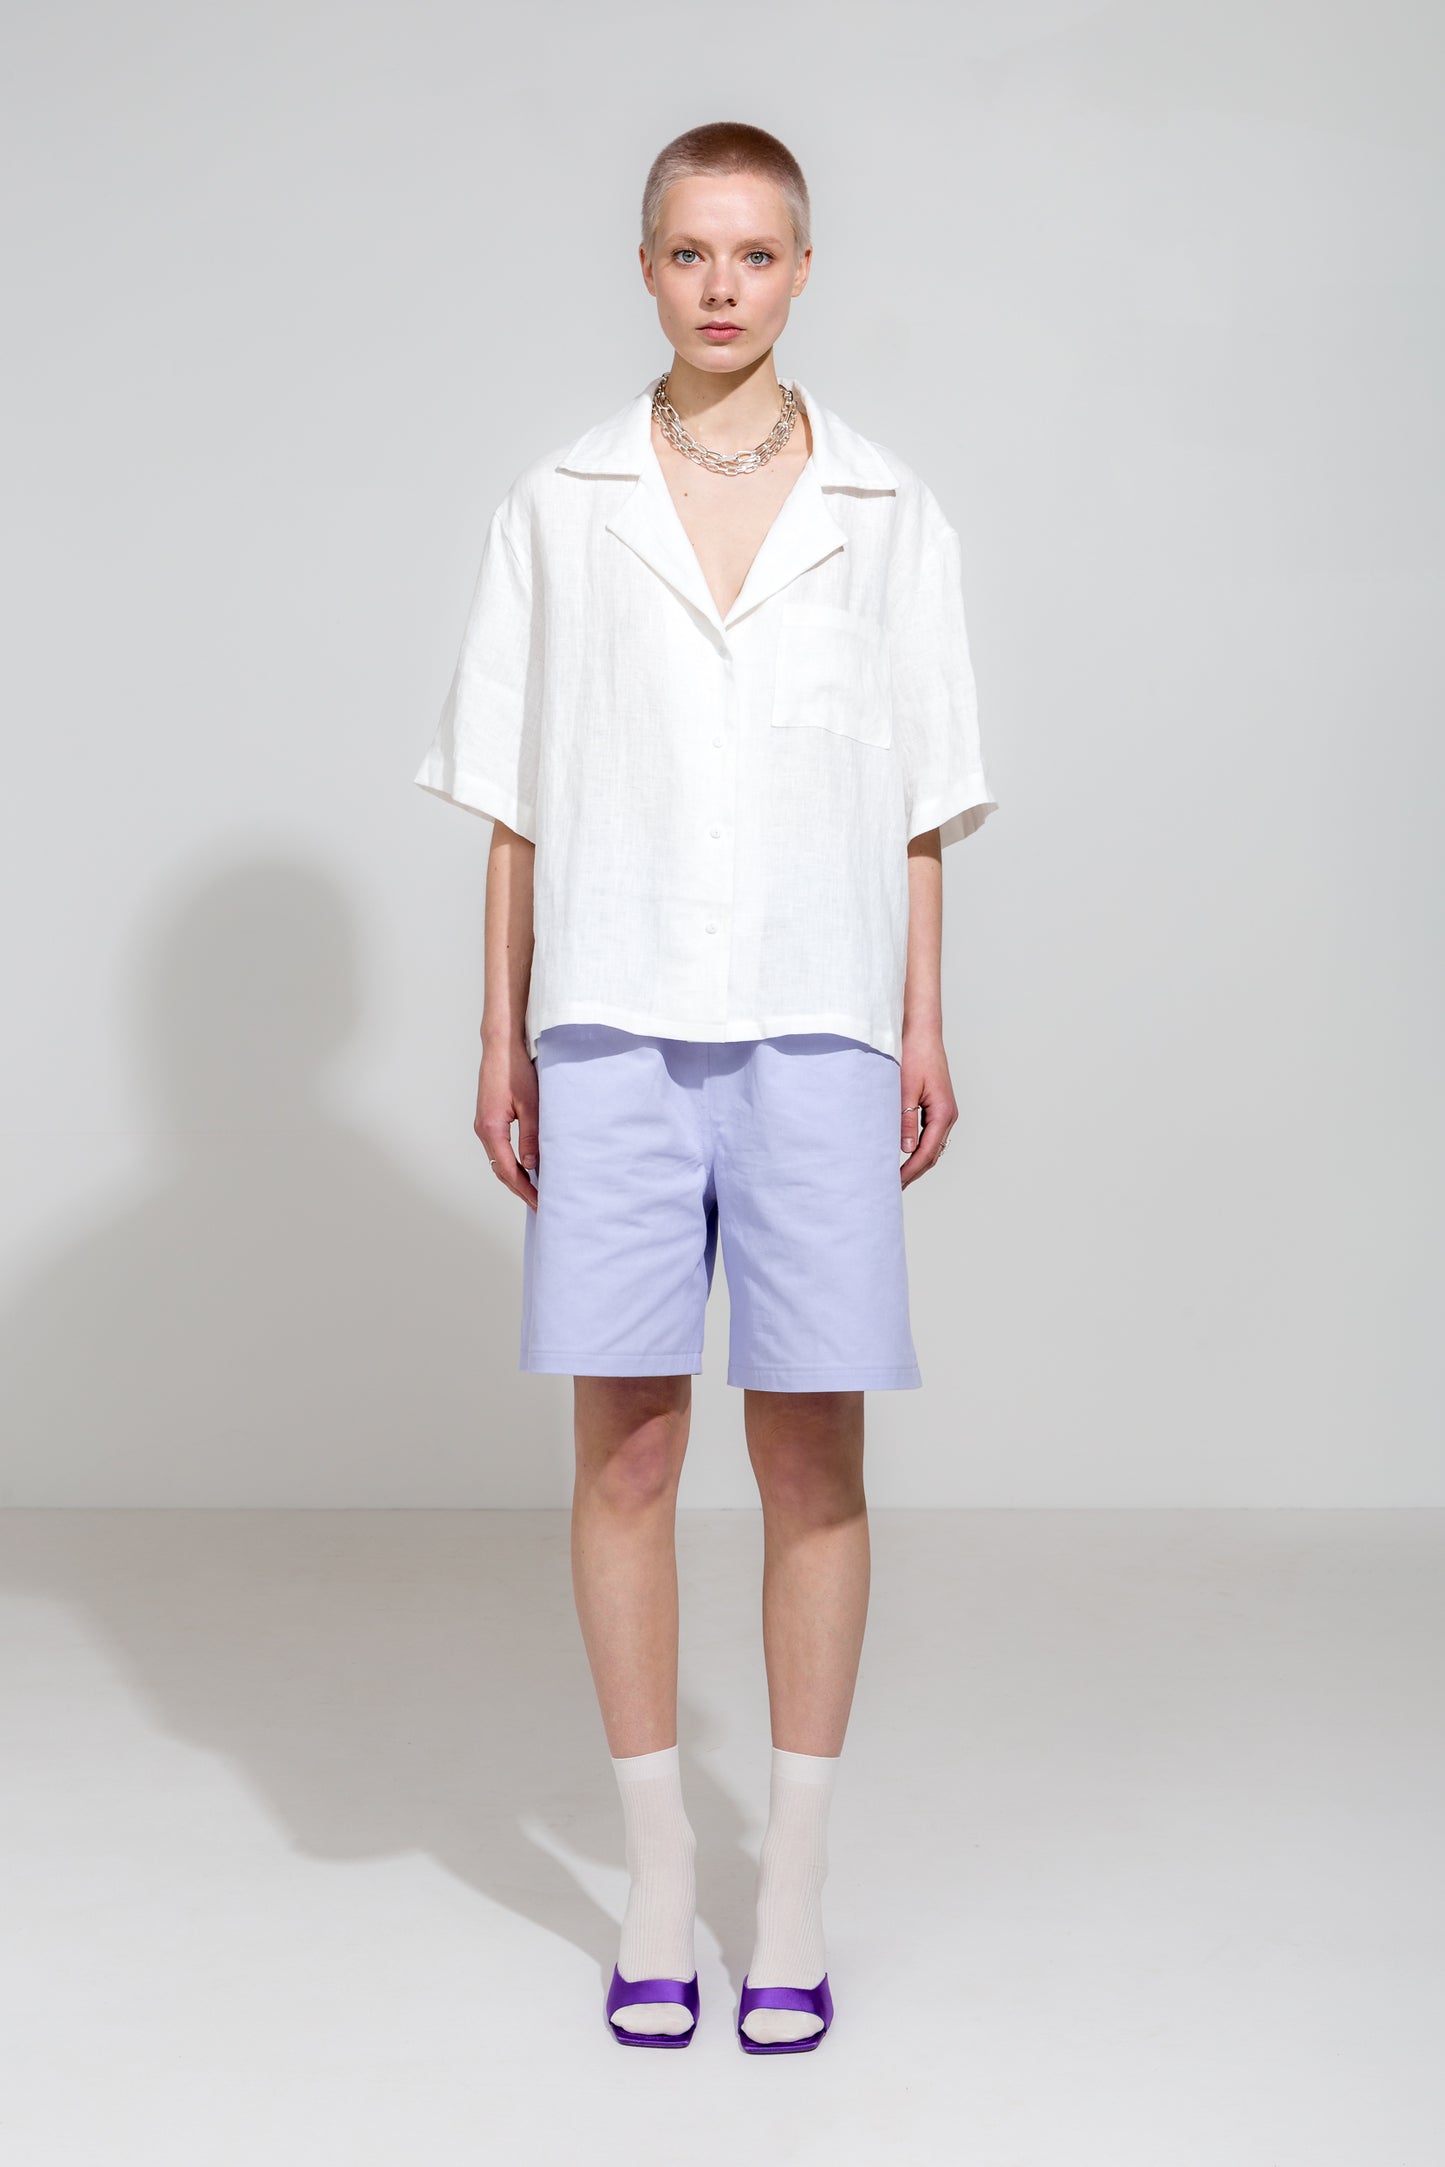 Open collar short sleeve shirt in white linen and lilac workwear shorts